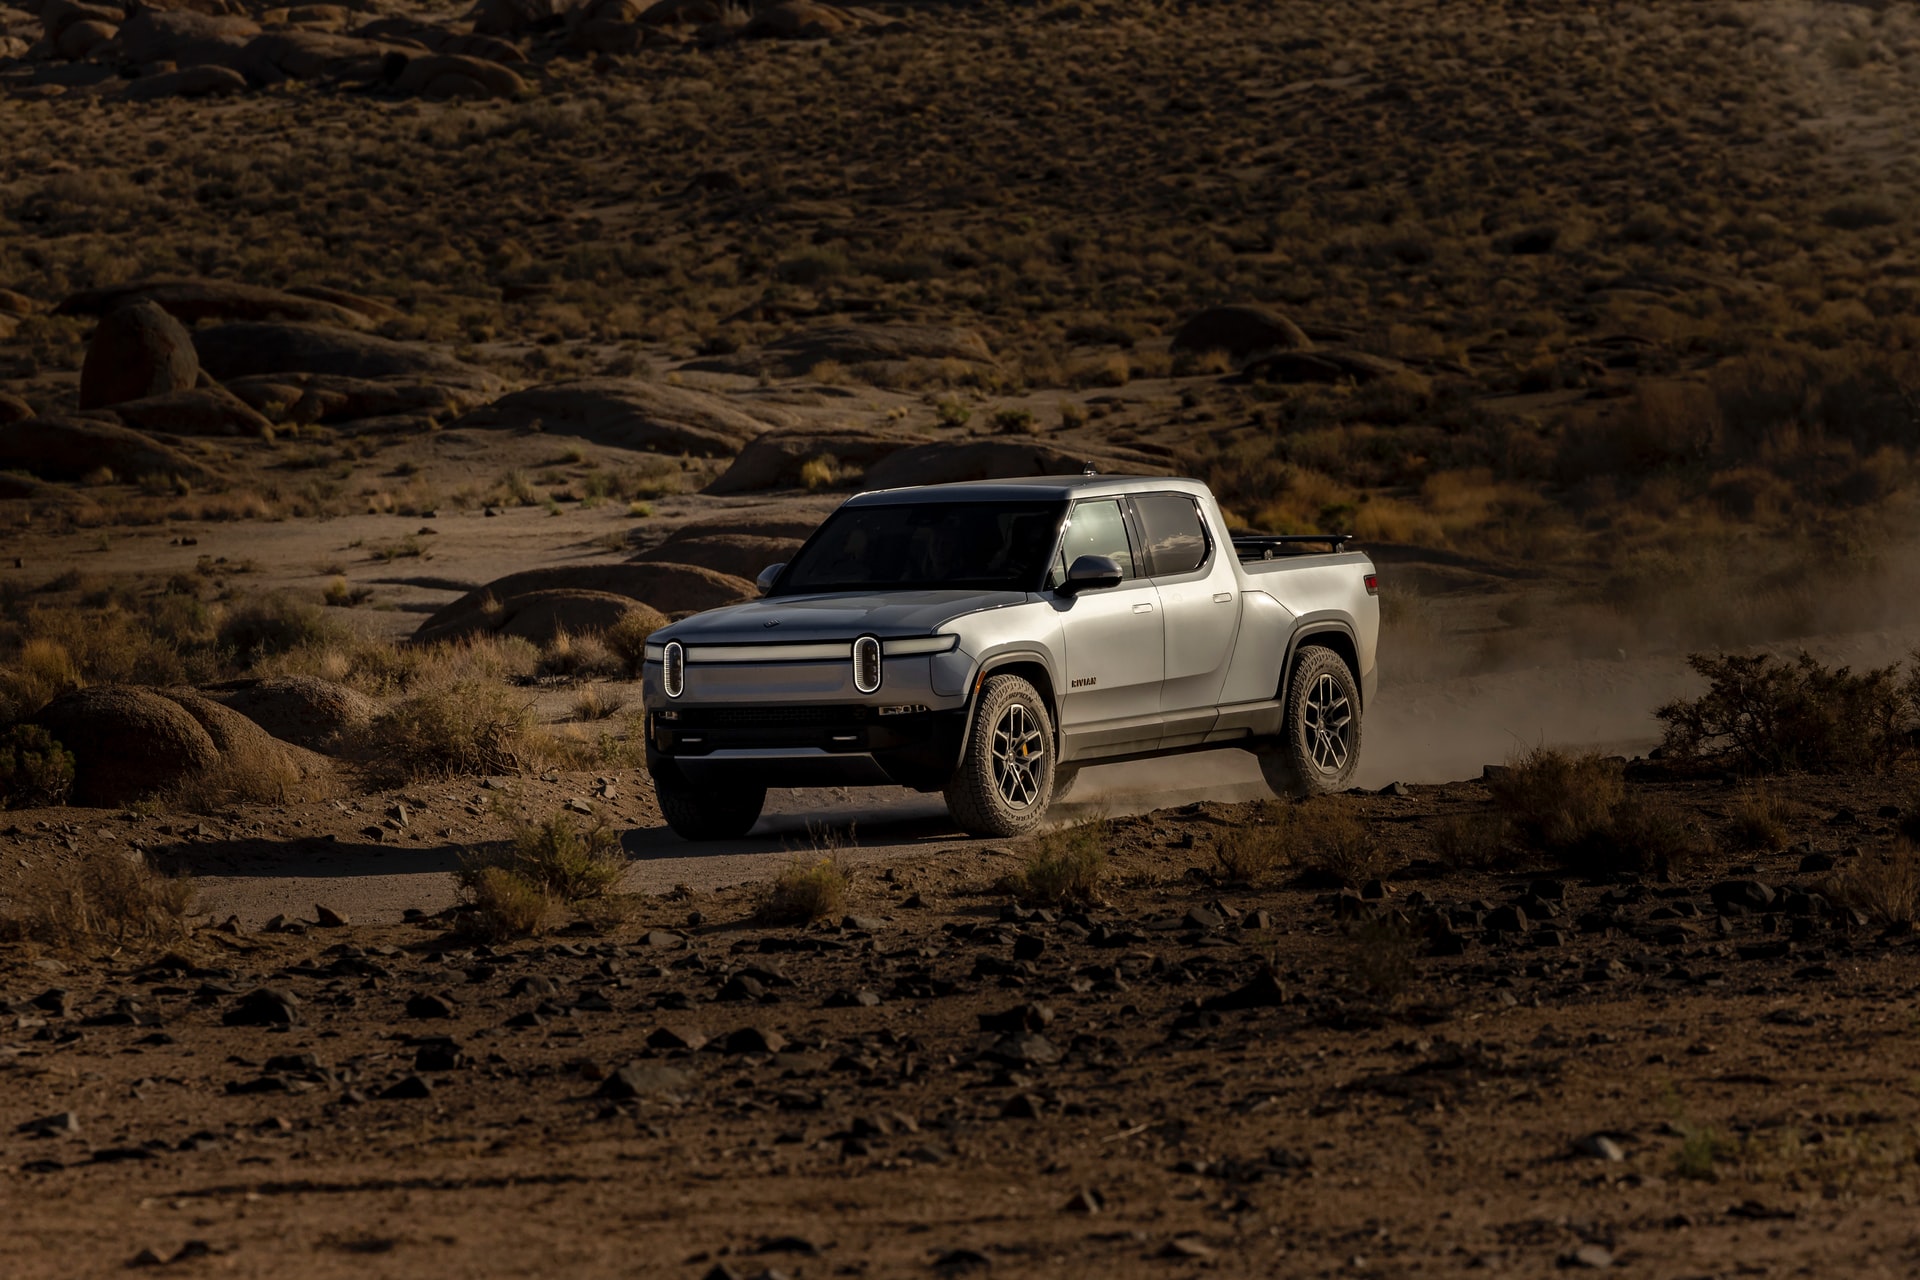 Rivian reportedly considers laying off 700 employees